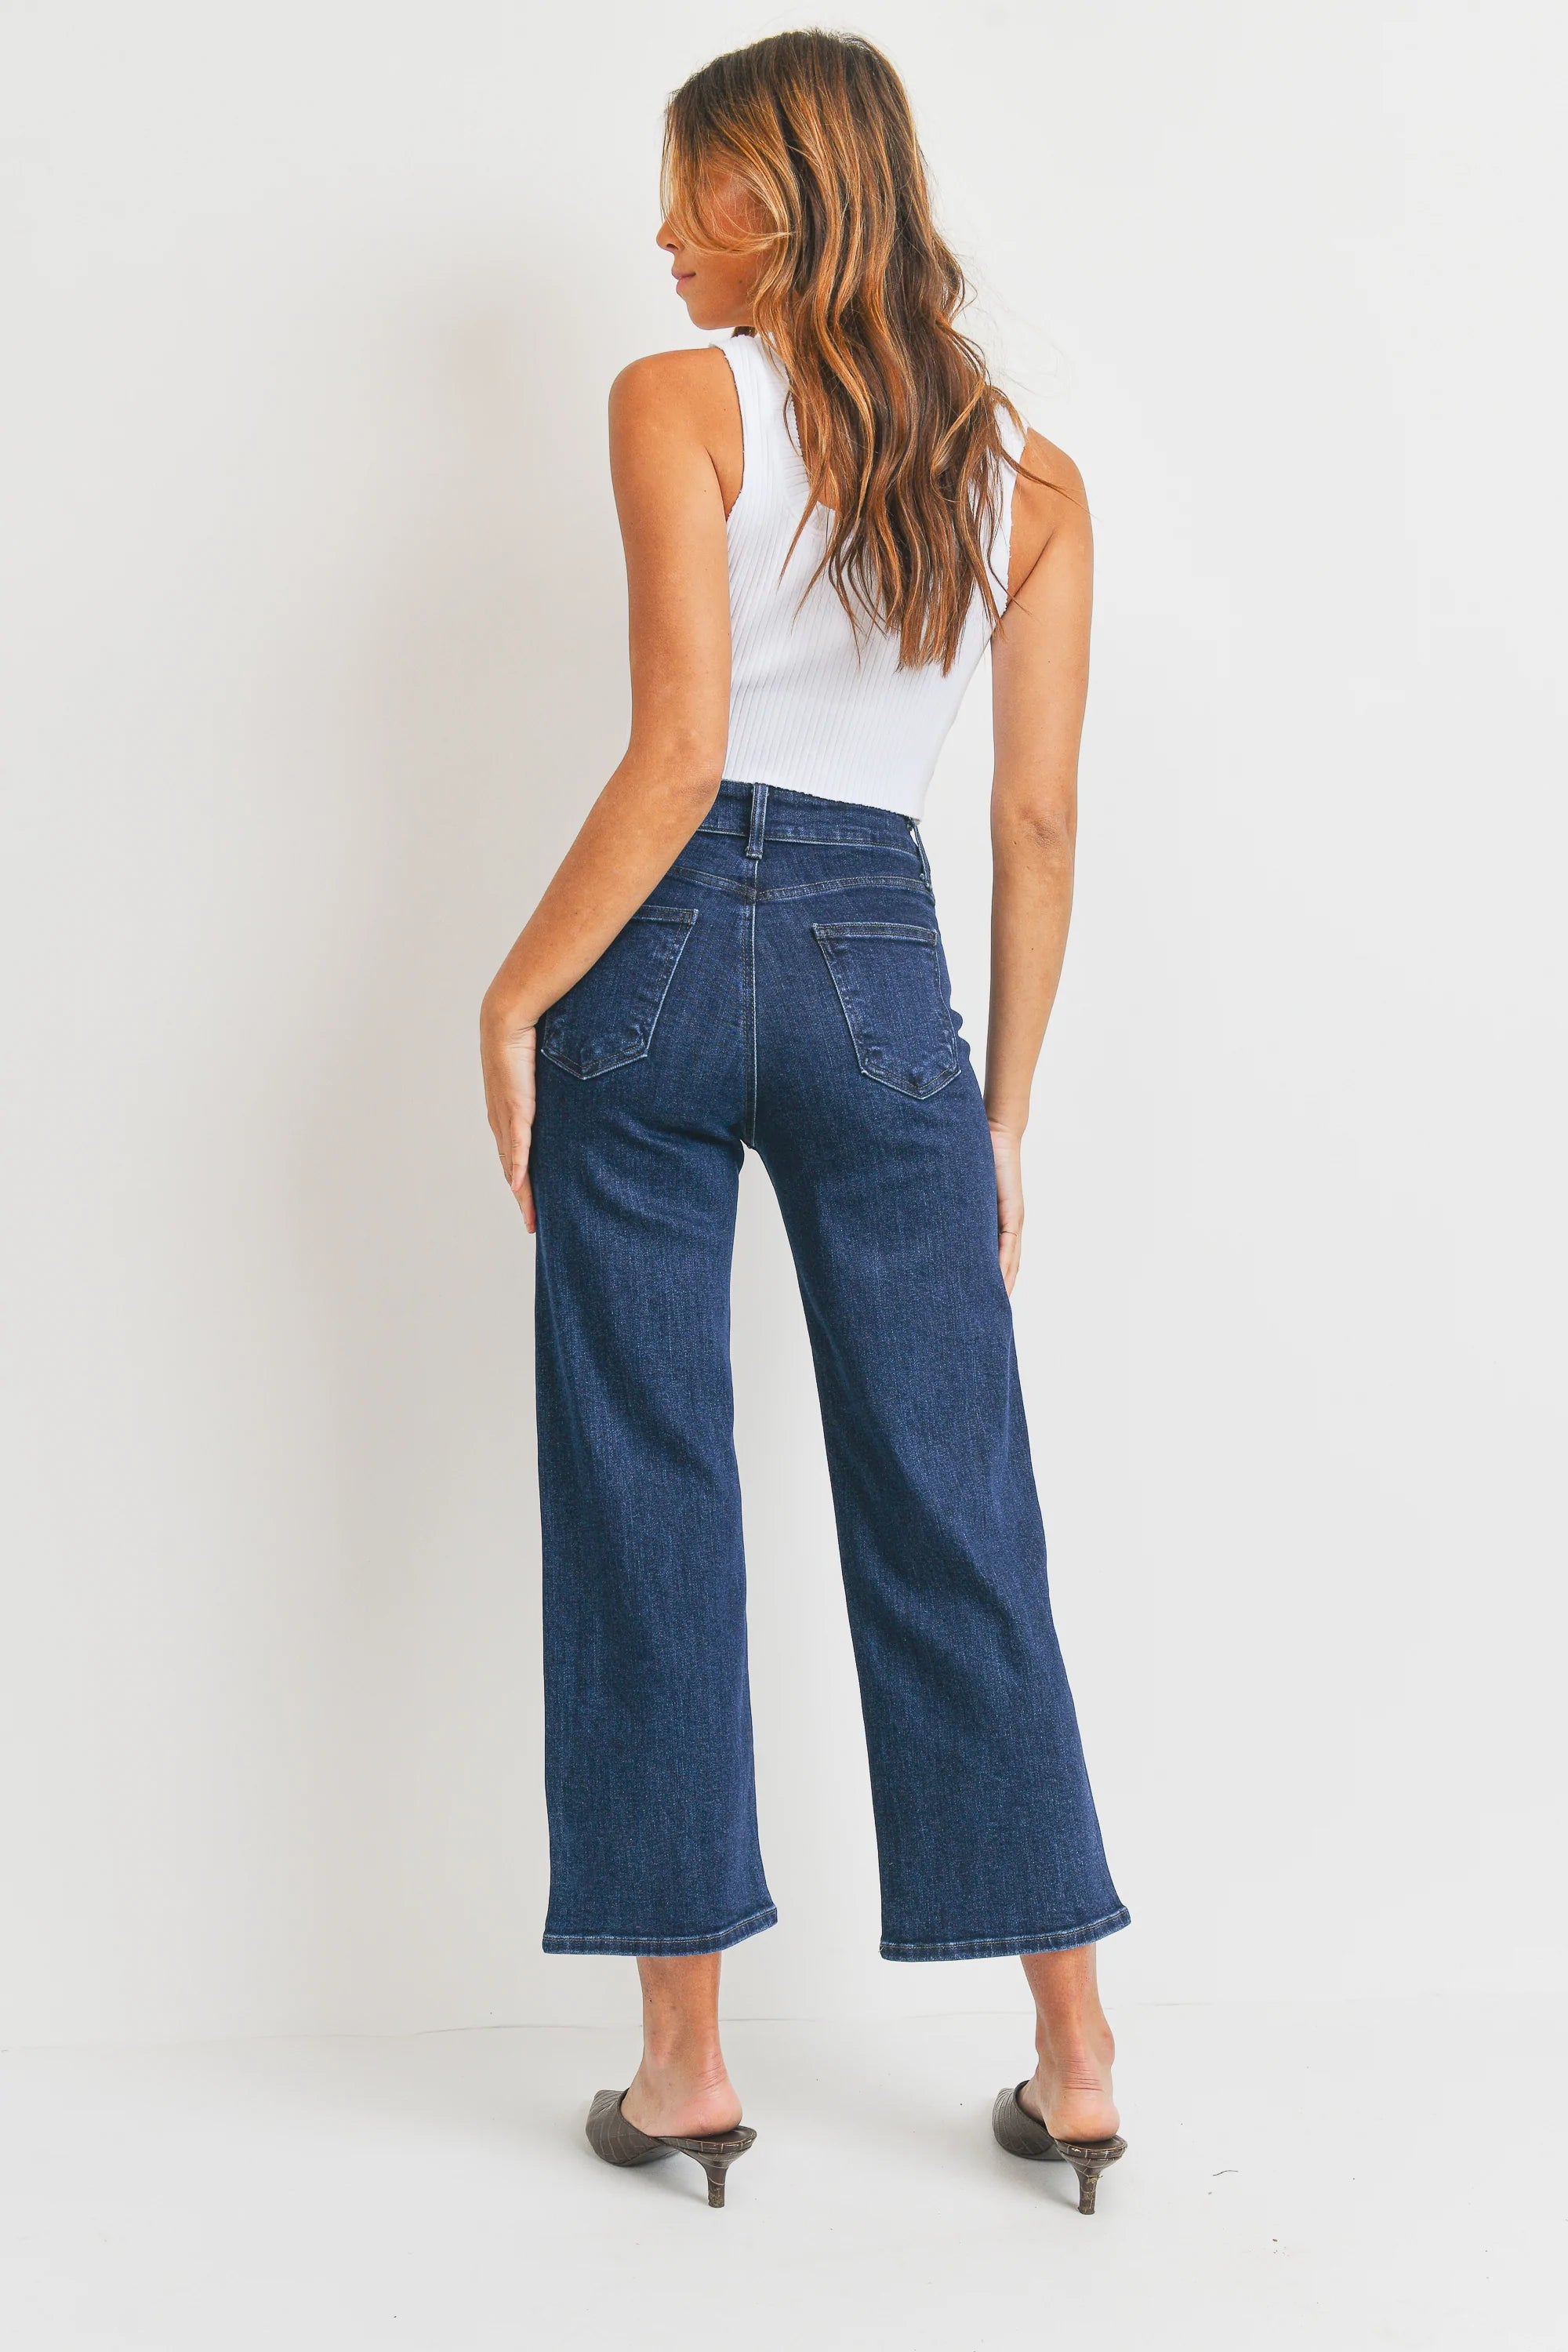 The Jemma Contemporary Wide Leg Jeans by Just Black Denim